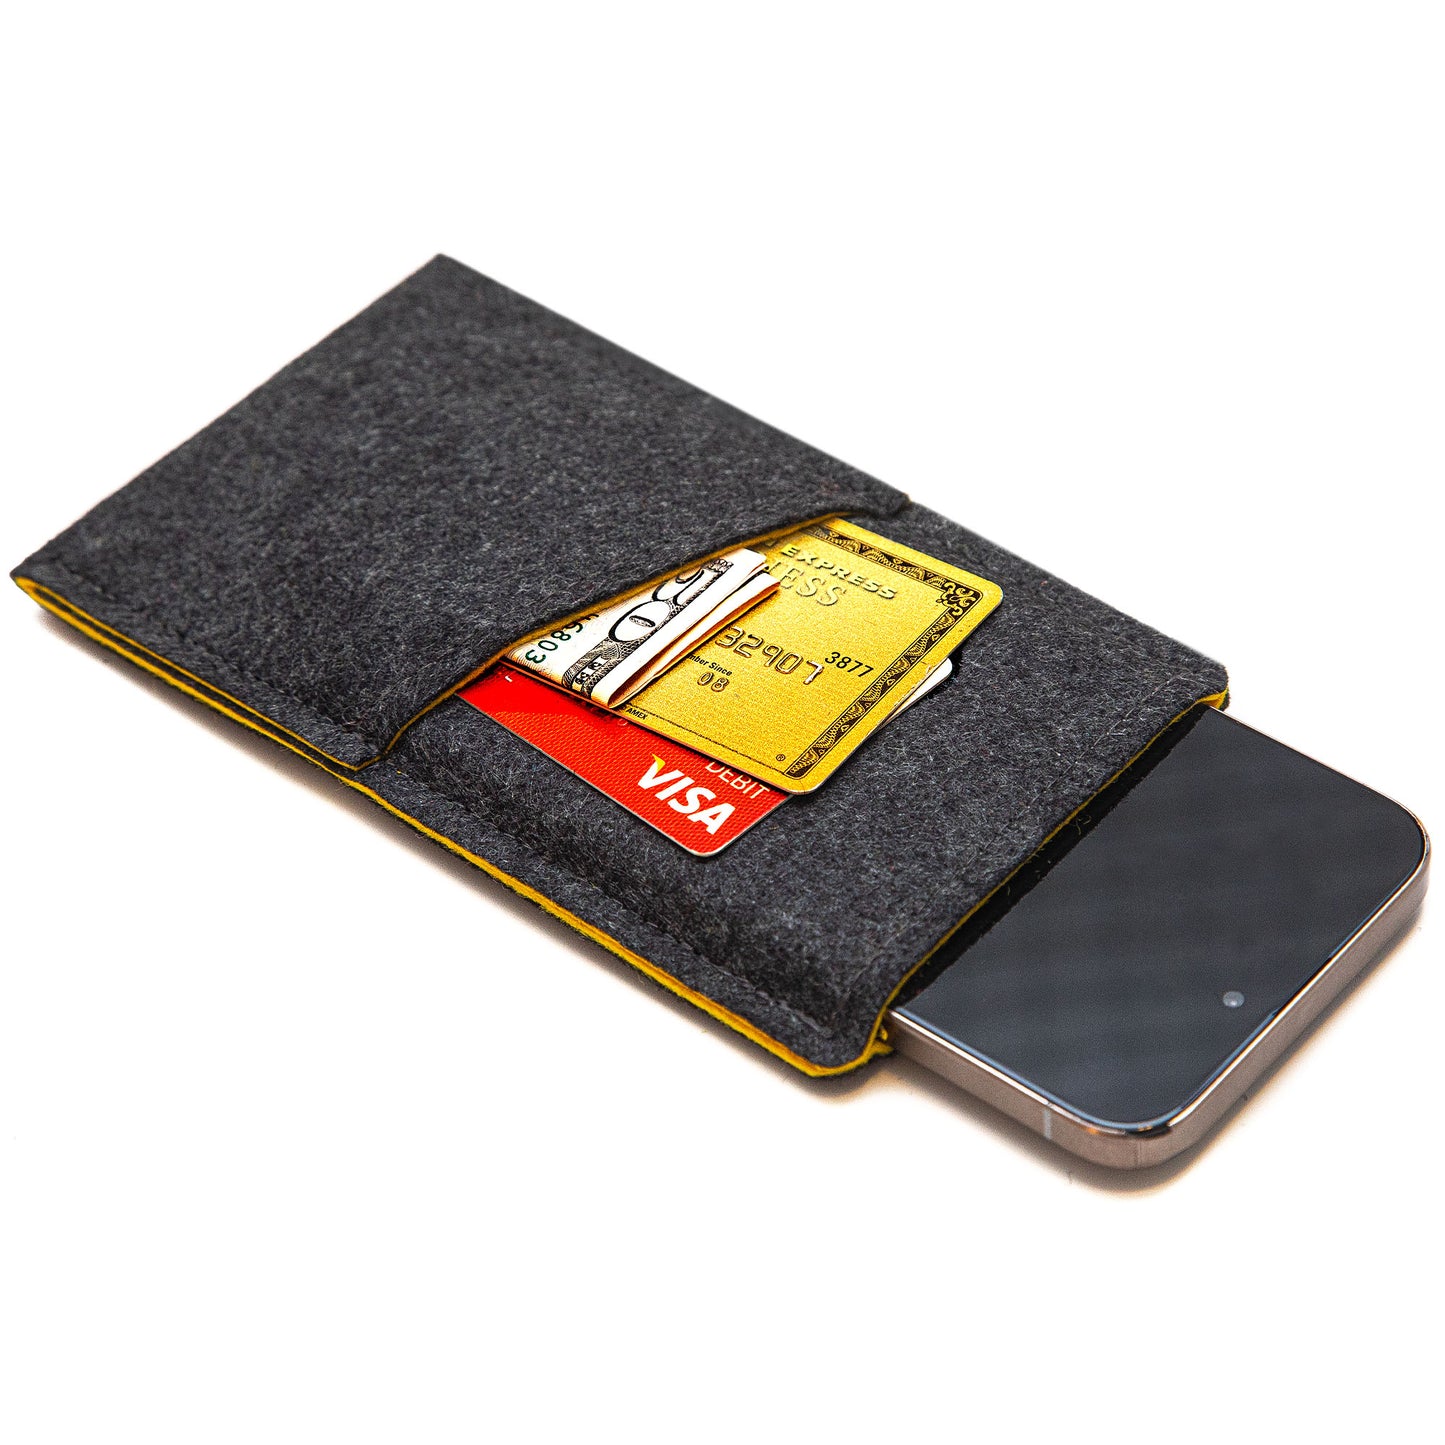 Premium Felt iPhone Sleeve with Card Pocket - Charcoal Gray & Yellow